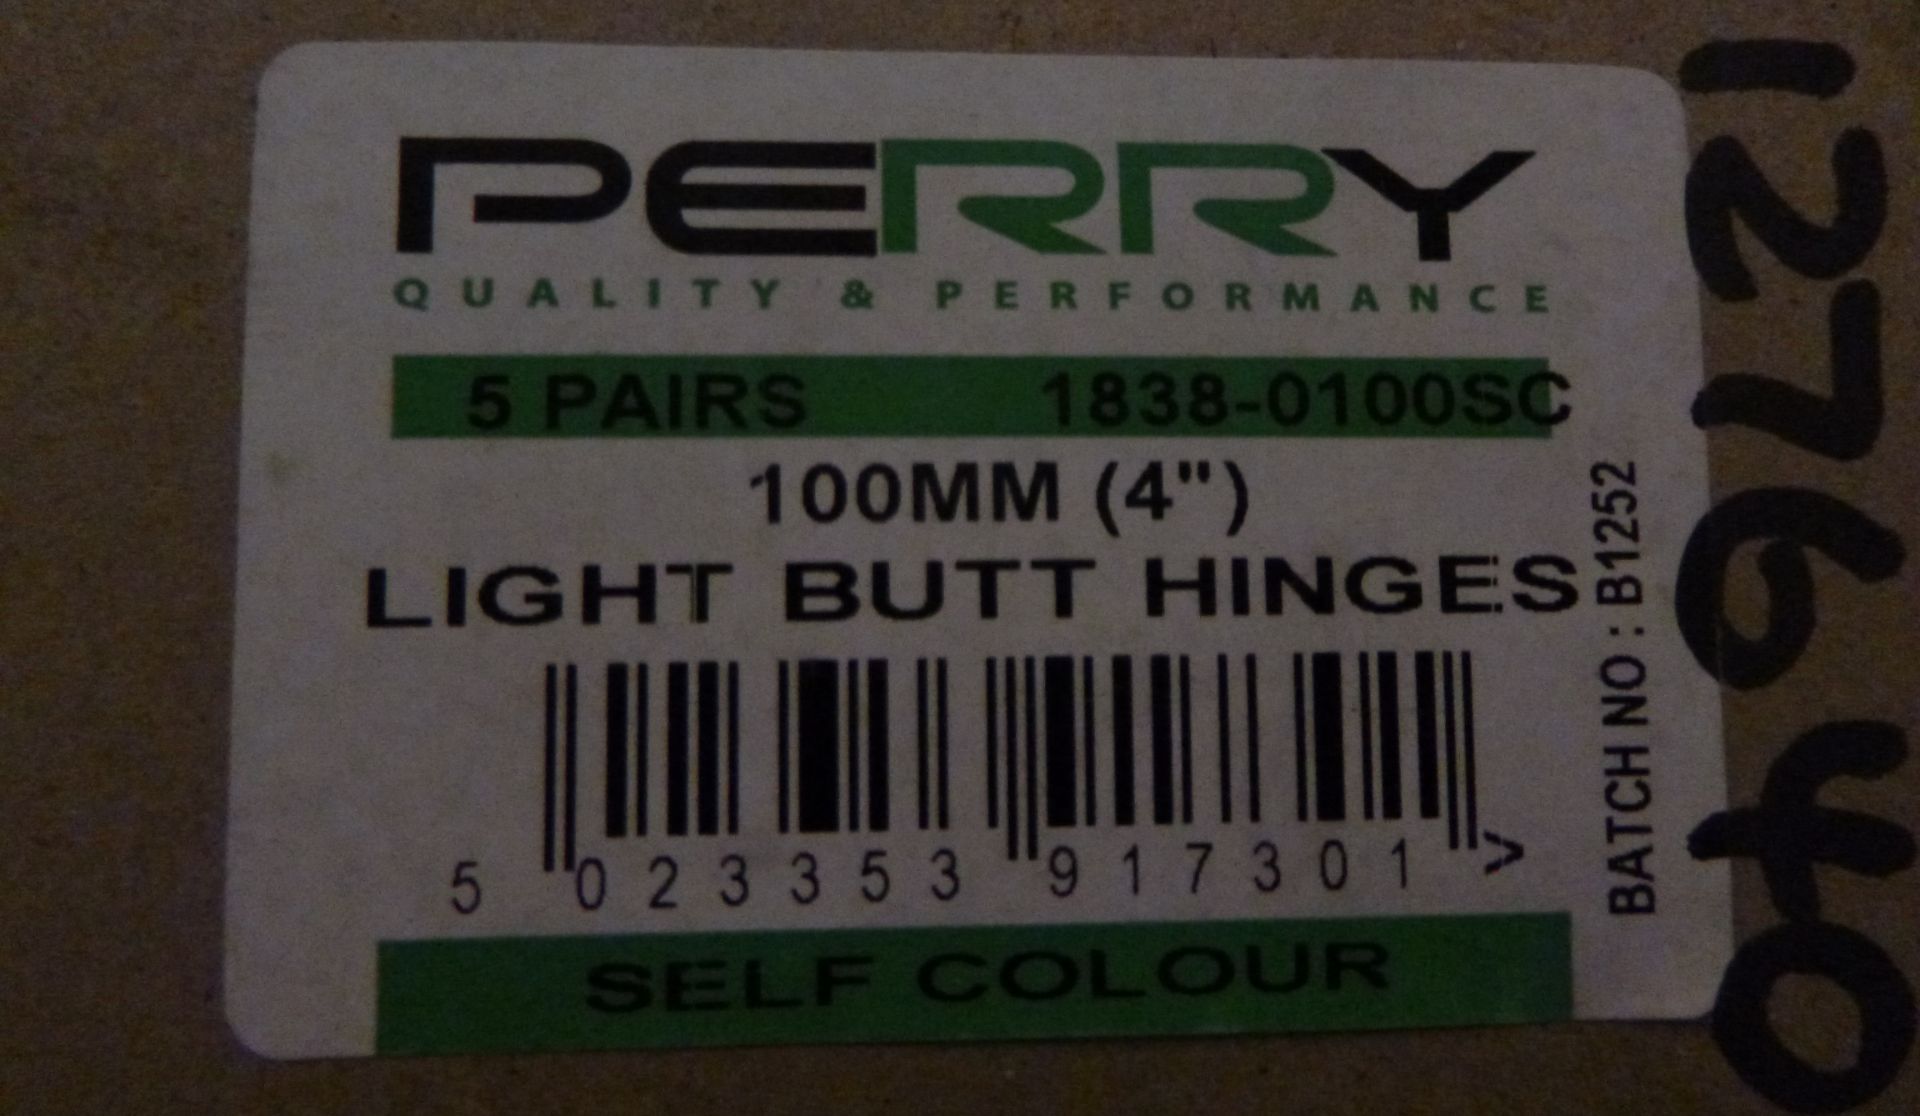 3 x Pack of 40 Perry&trade; 100mm 4" No.1838 Light Butt Hinges | EAN: 5023353917301 | RRP £141 - Image 2 of 2